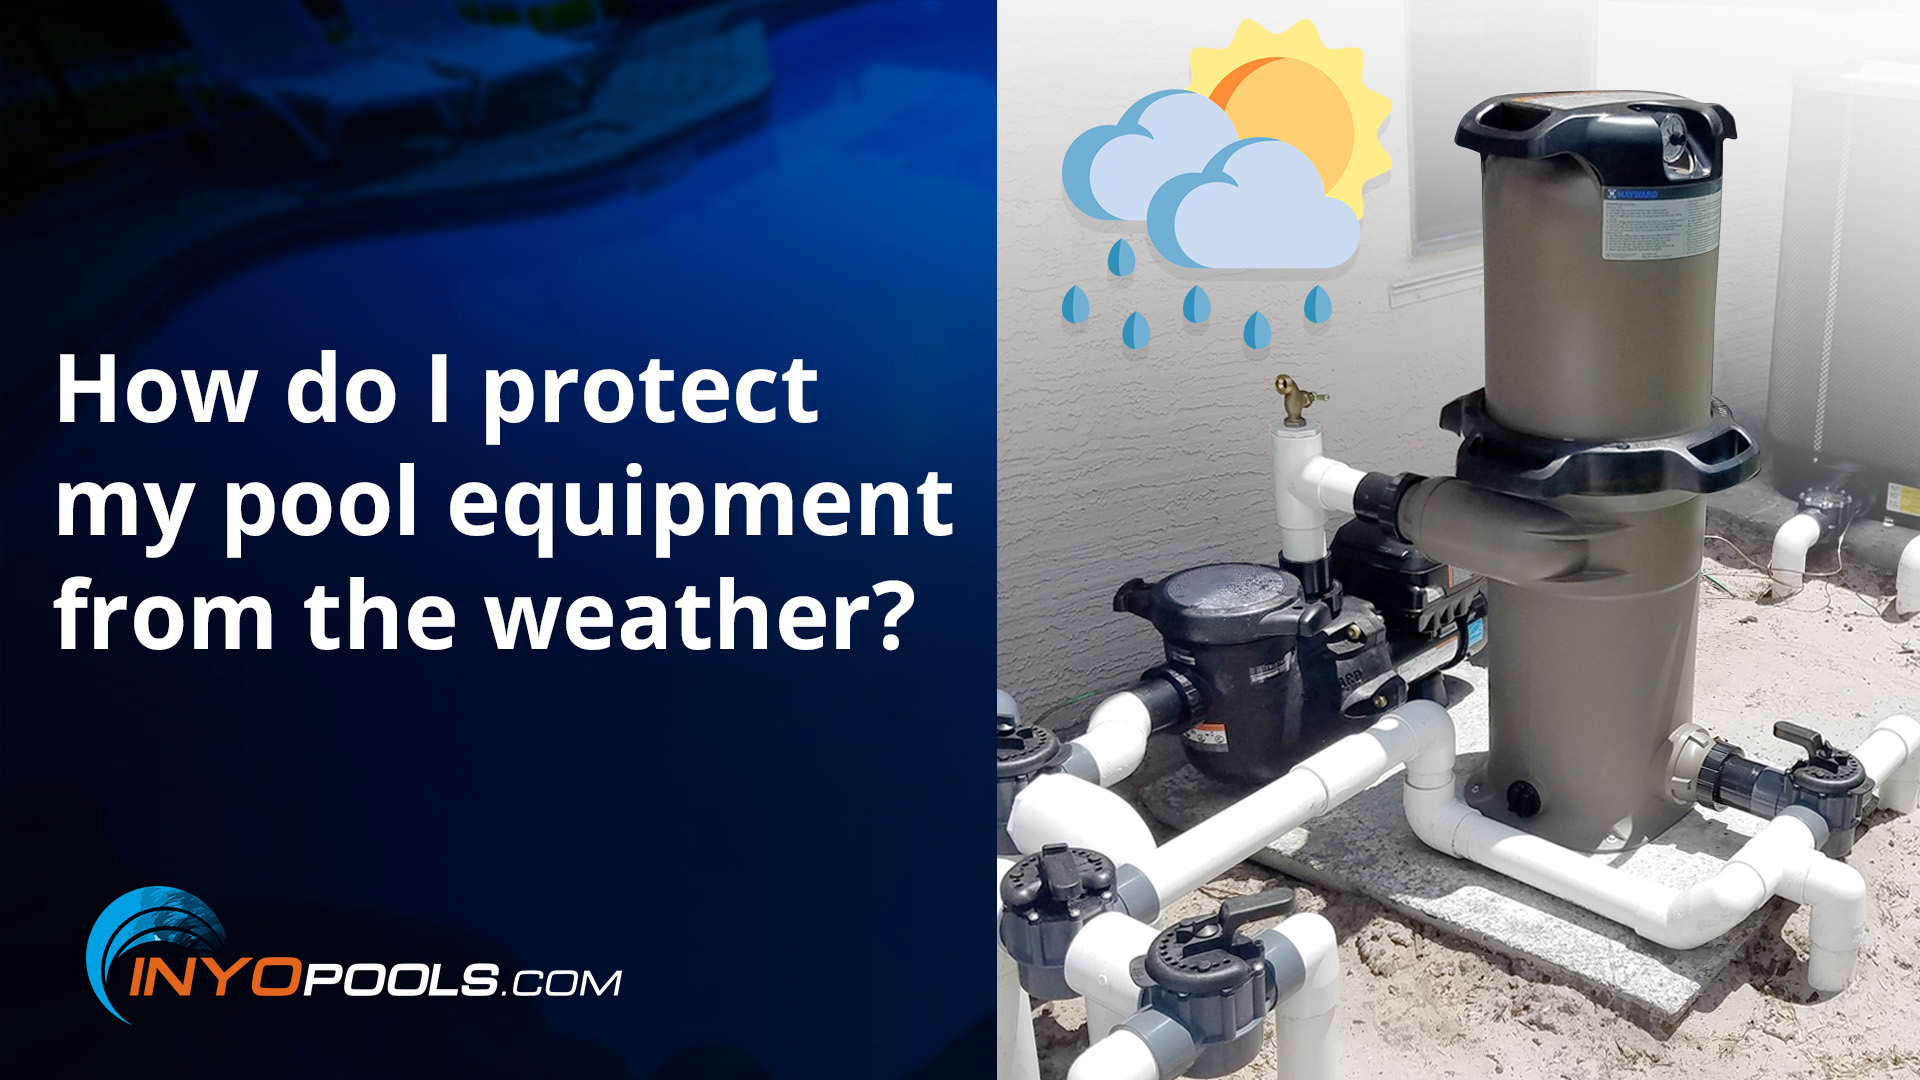 How do I protect my pool equipment from the weather?